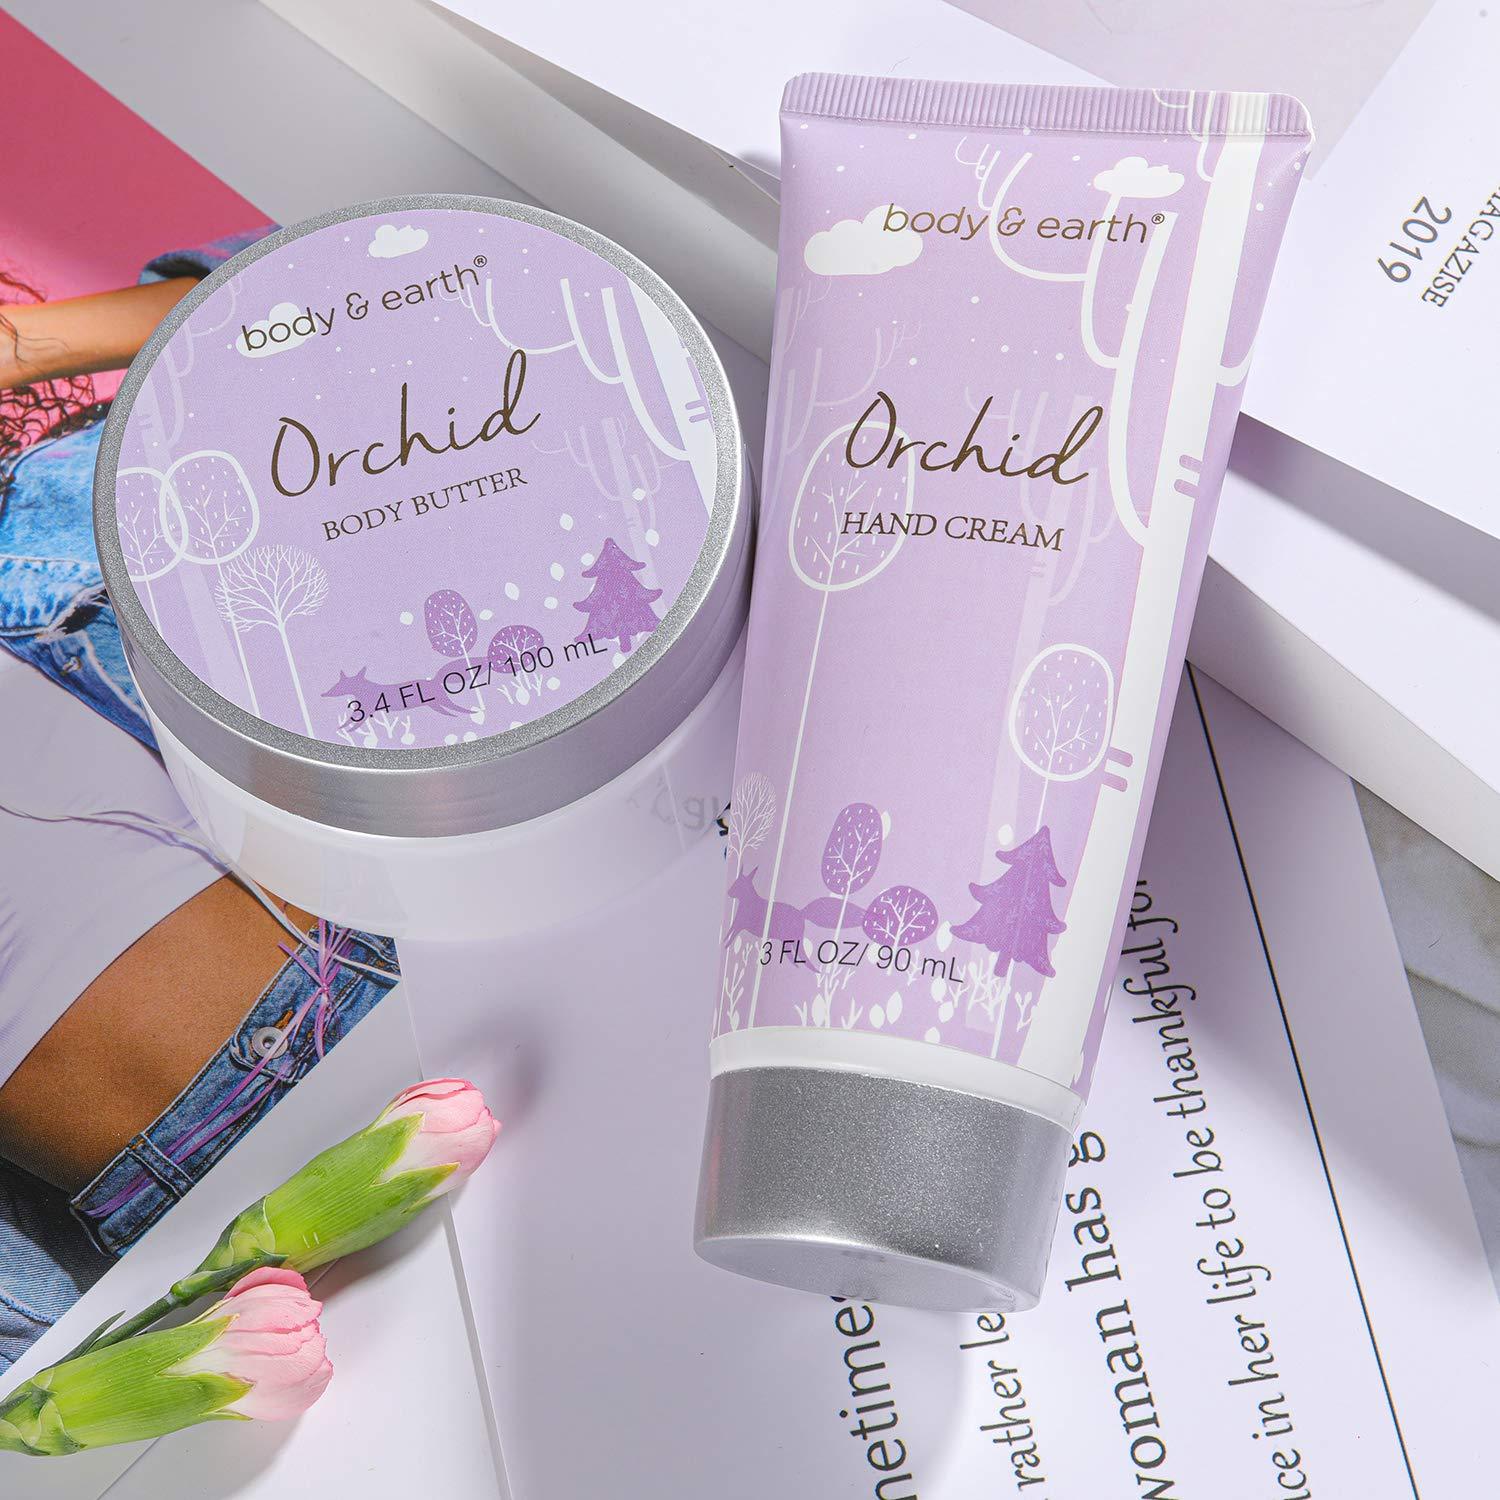 Body &amp; Earth Gift Sets Orchid Bath Gift Set